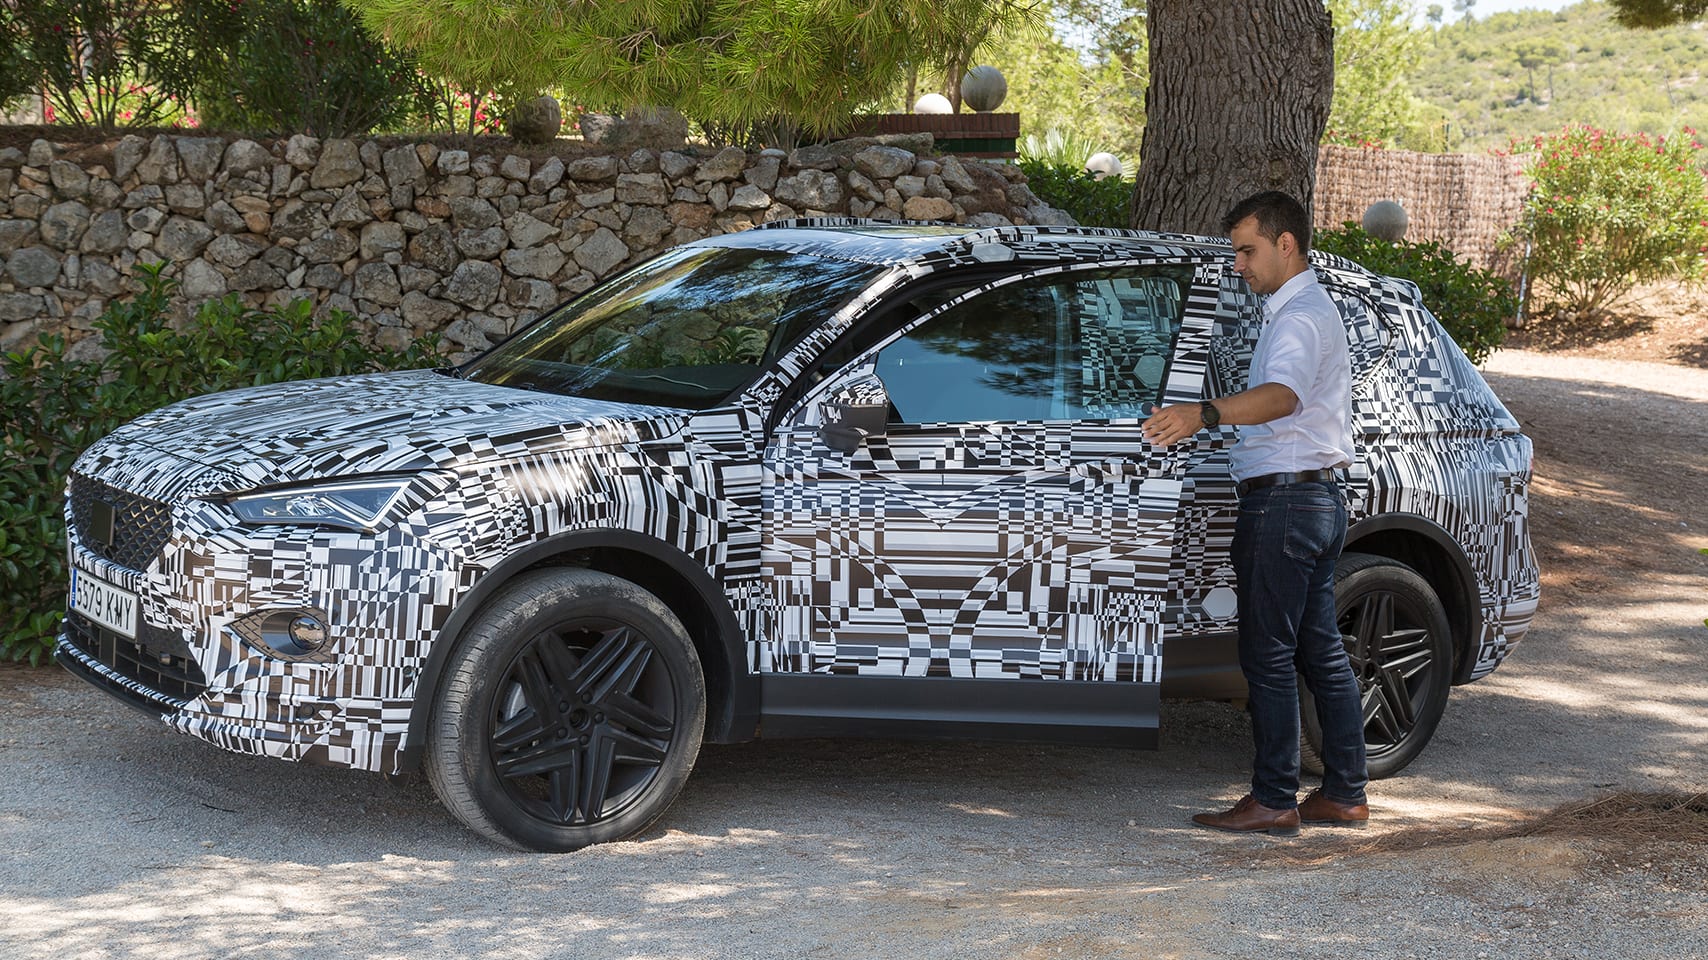 On and off-road test driving the new SEAT Tarraco large SUV